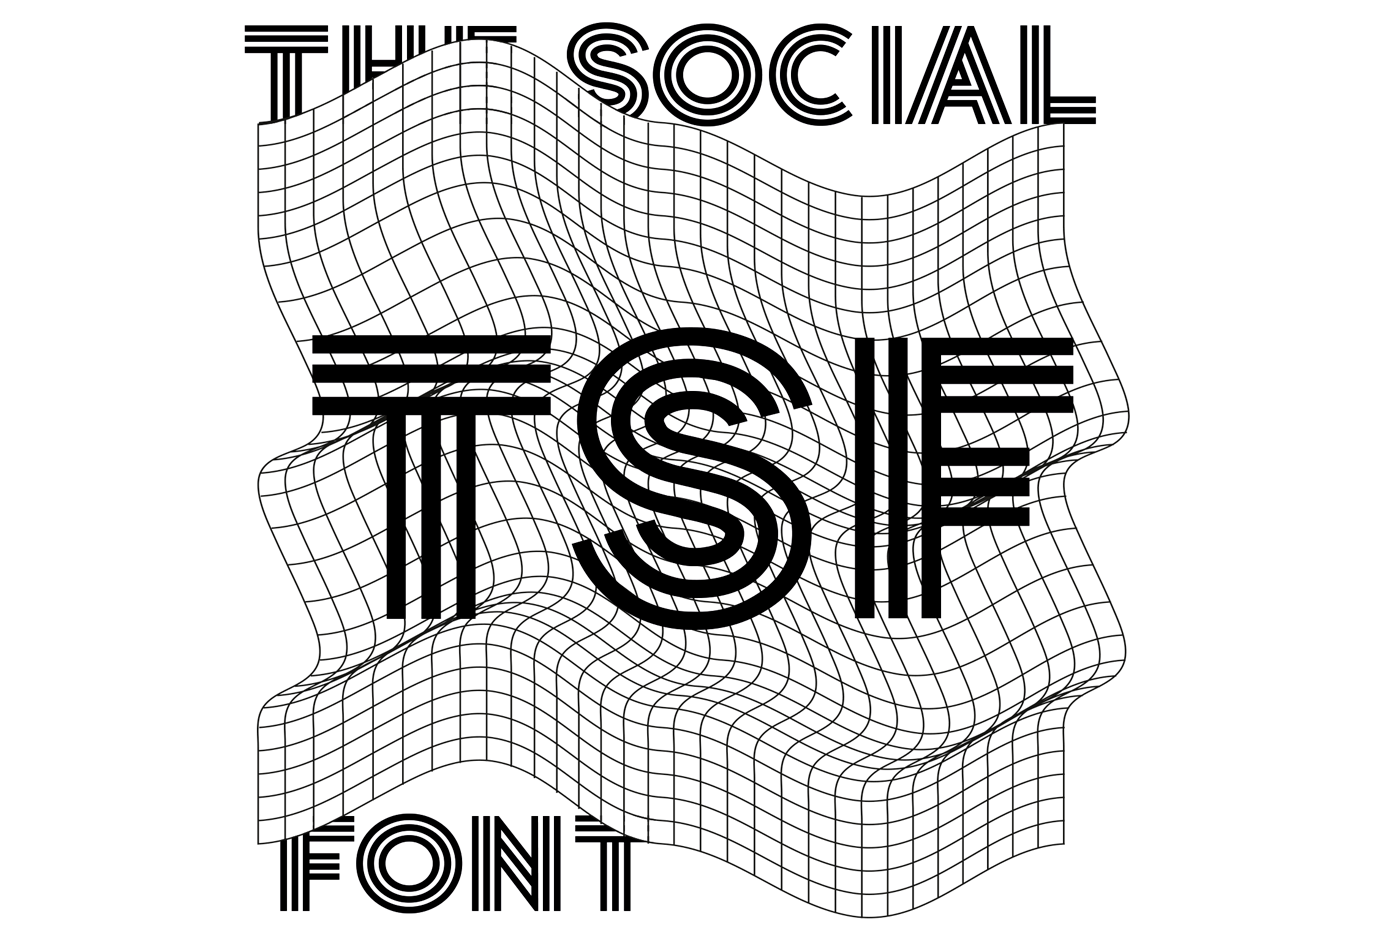 Example font The Social #2